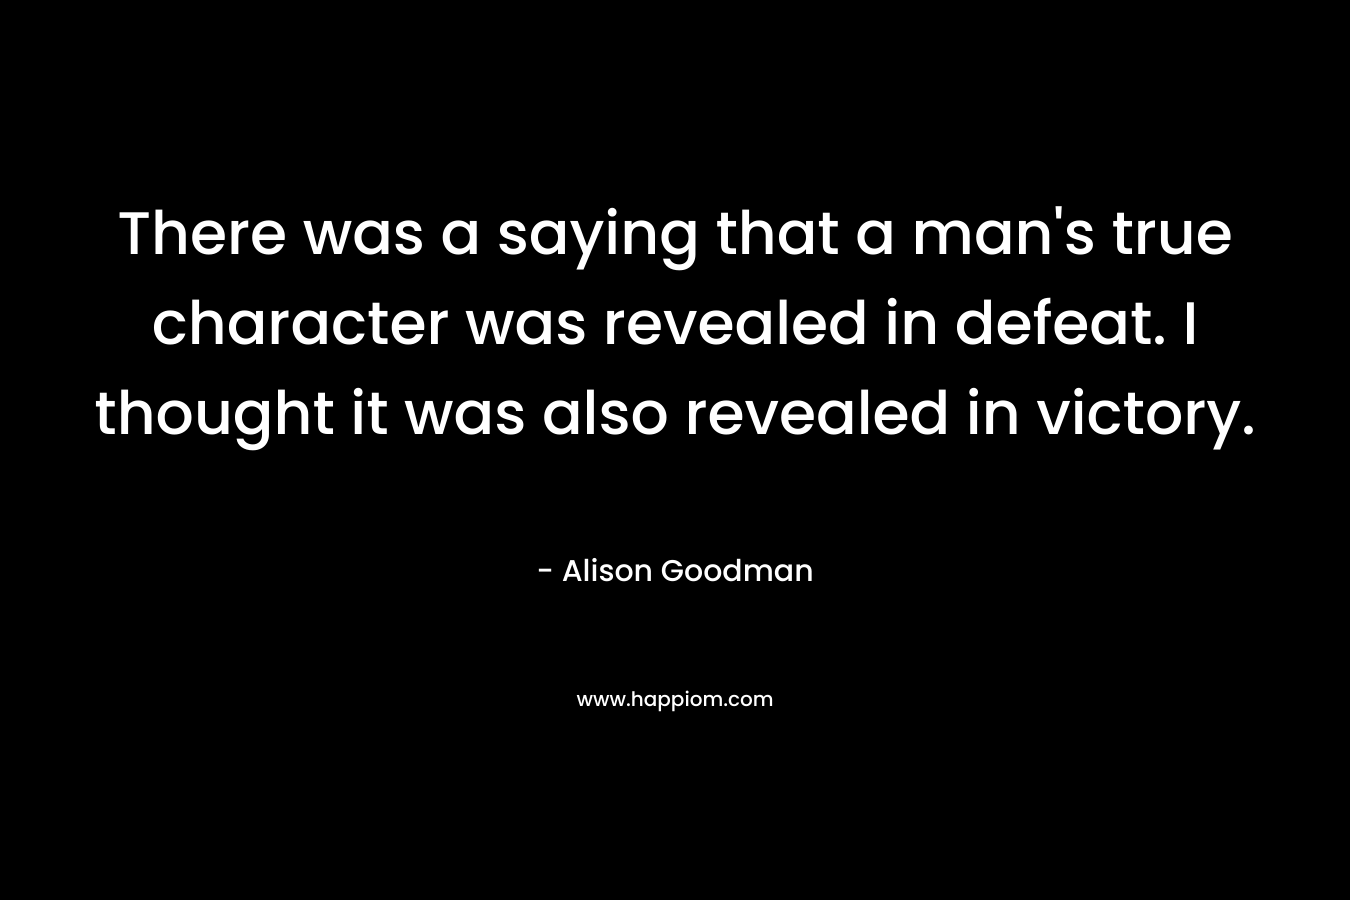 There was a saying that a man’s true character was revealed in defeat. I thought it was also revealed in victory. – Alison Goodman